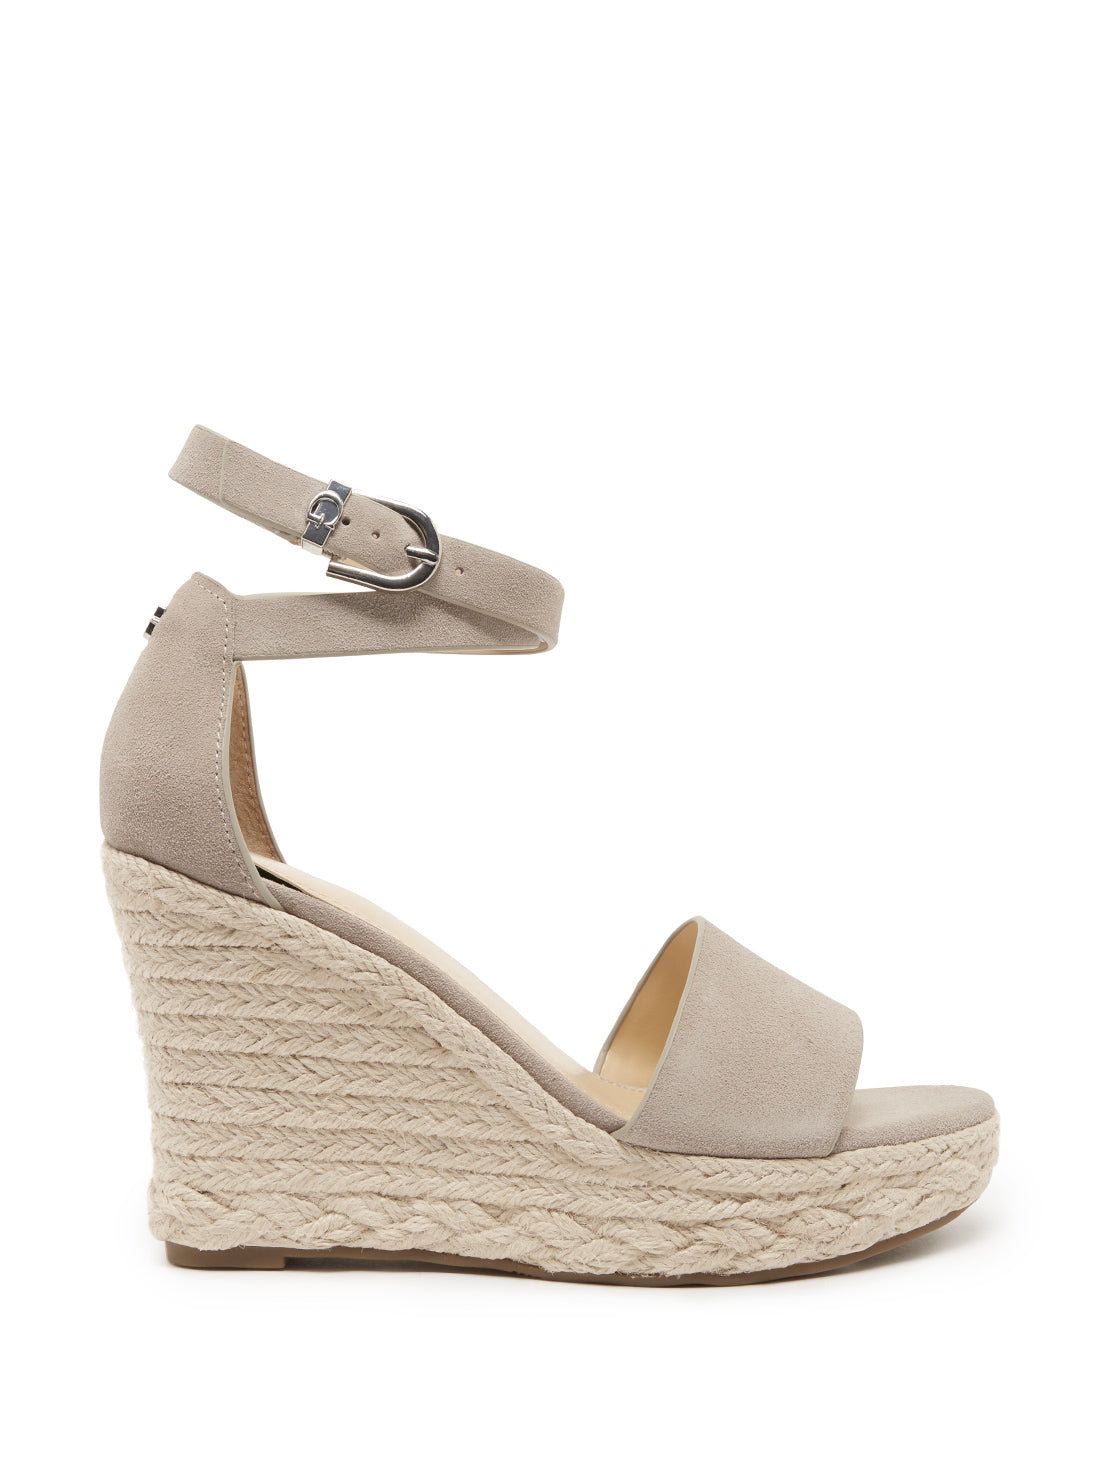 GUESS Womens Light Grey Hidy Suede Espadrille Wedges HIDY Side View